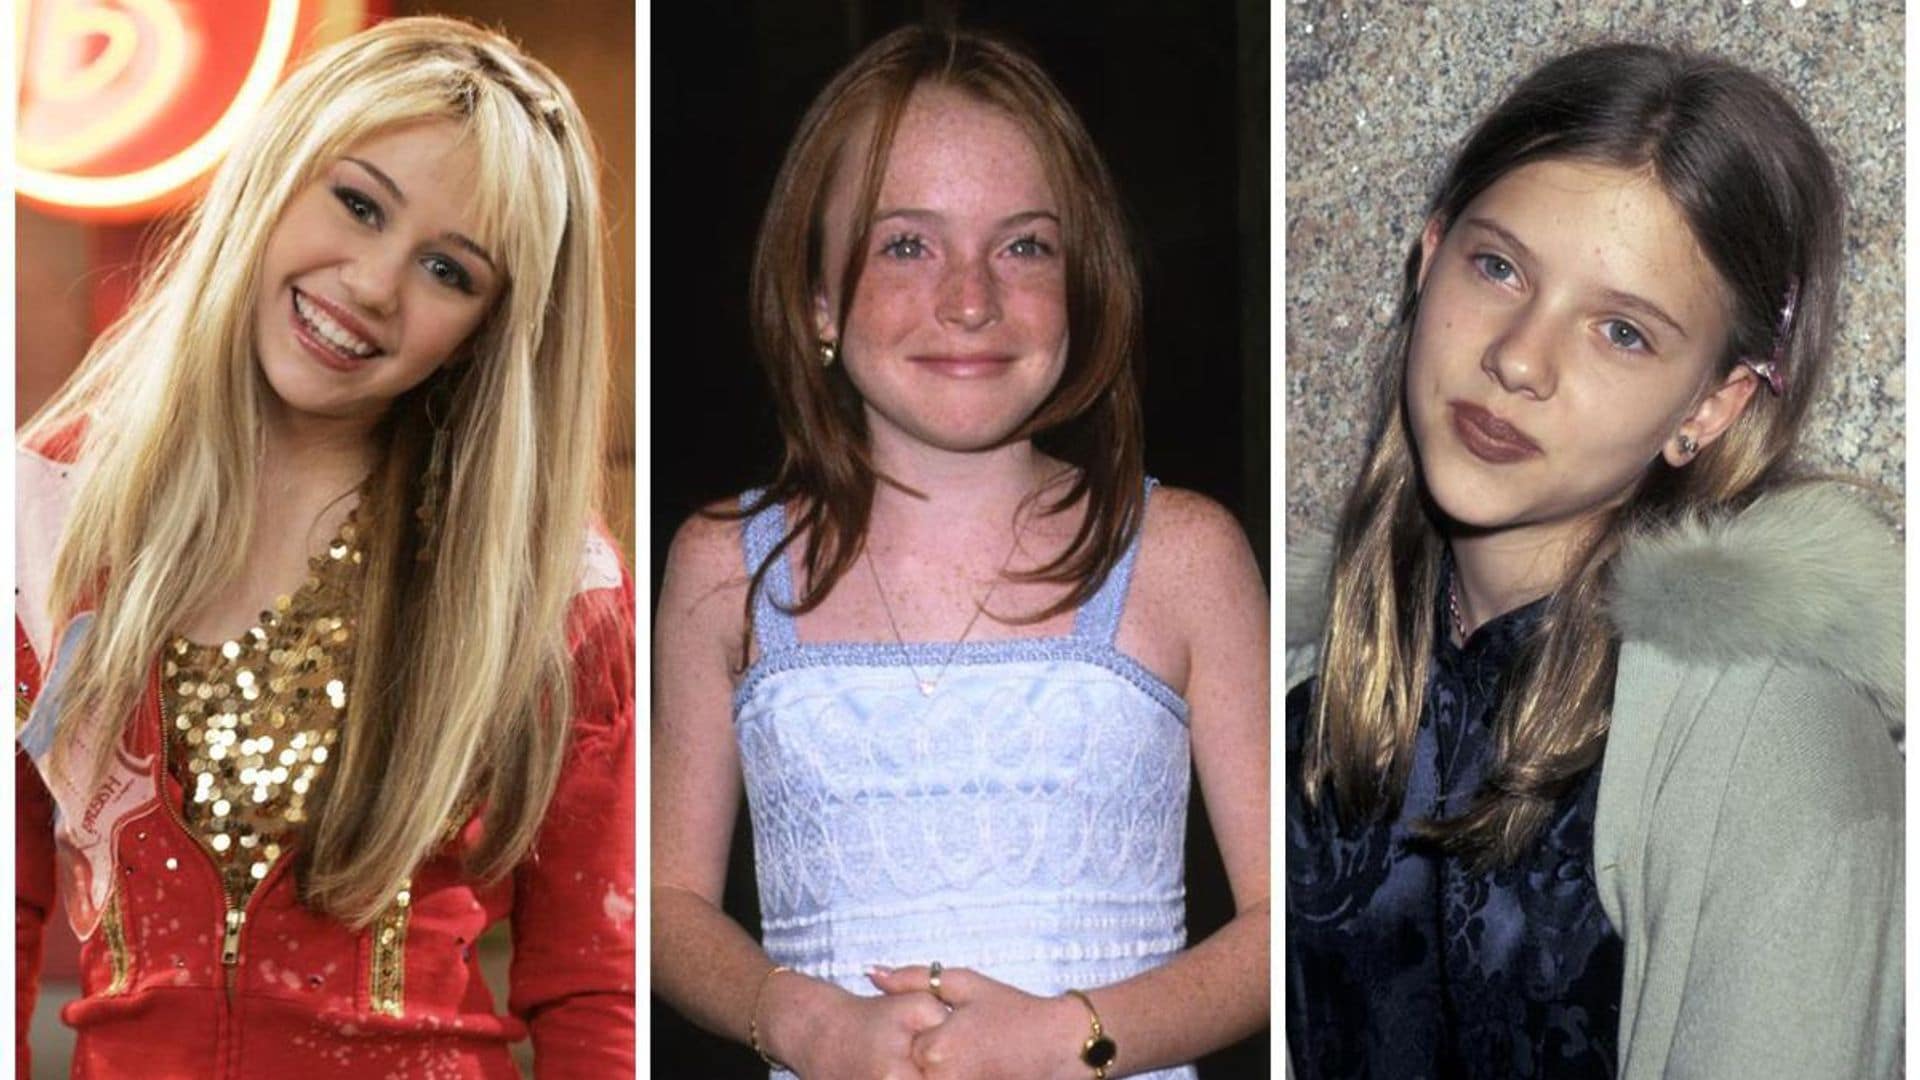 10 celebrities who were child stars and are still successful